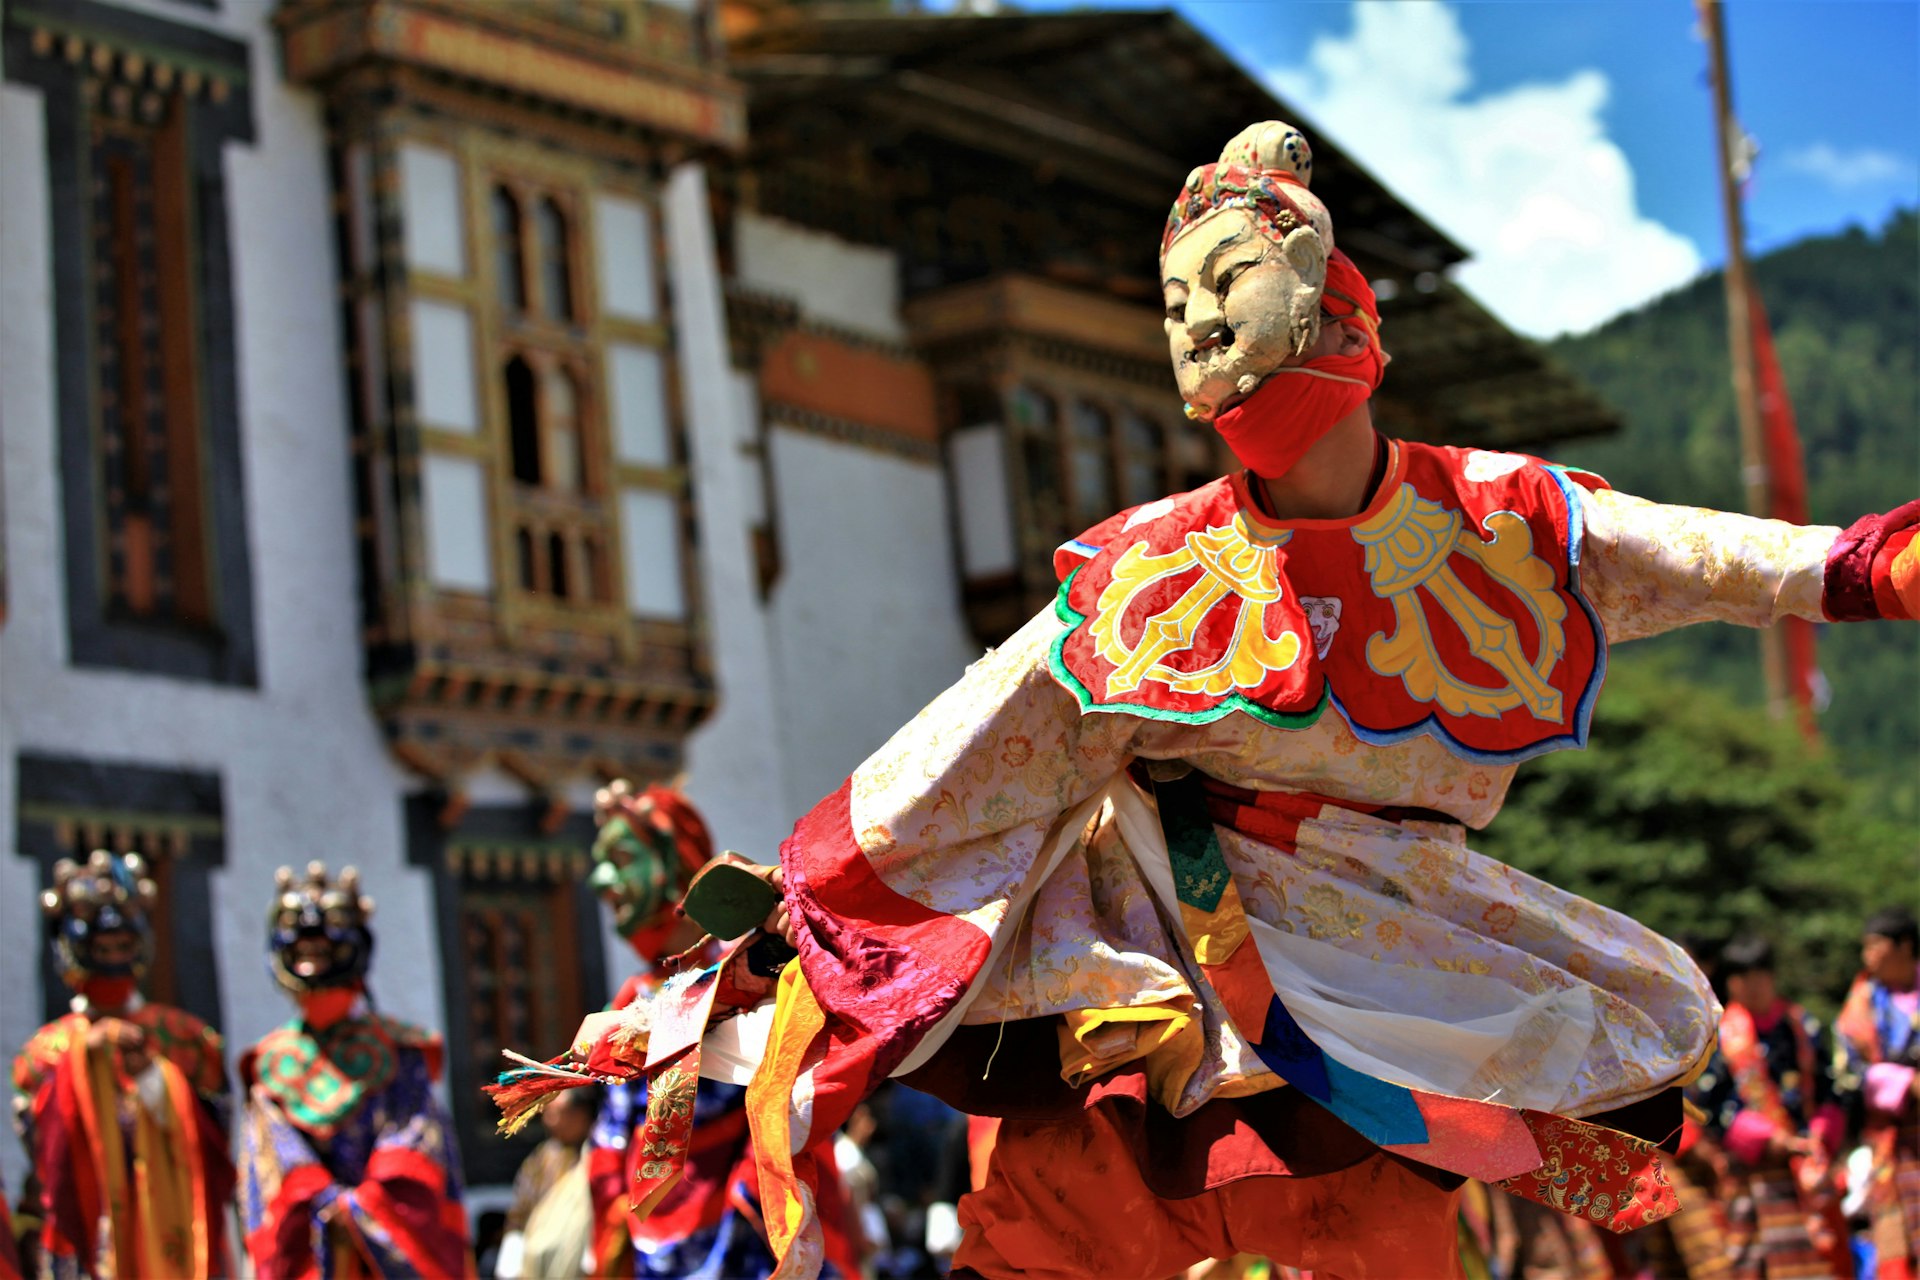 Traditional dance and colors in Mongar, Bhutan